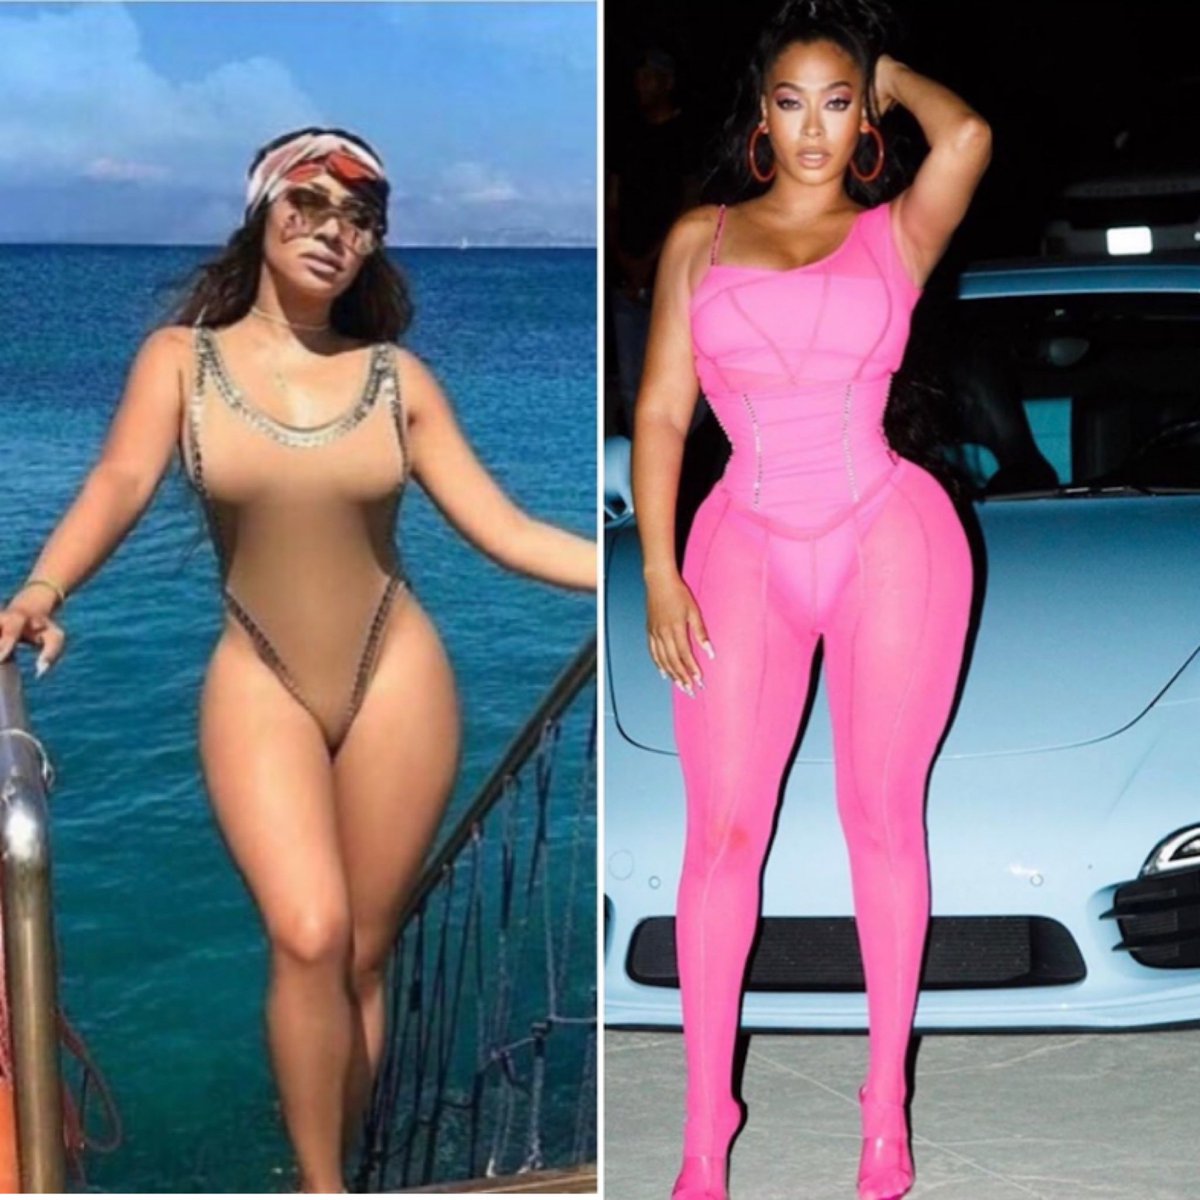 Classic celebrity example . Our girl LaLa. Sis been getting surgery for like 10 years. It took multiple rounds to correct her inverted V shape.